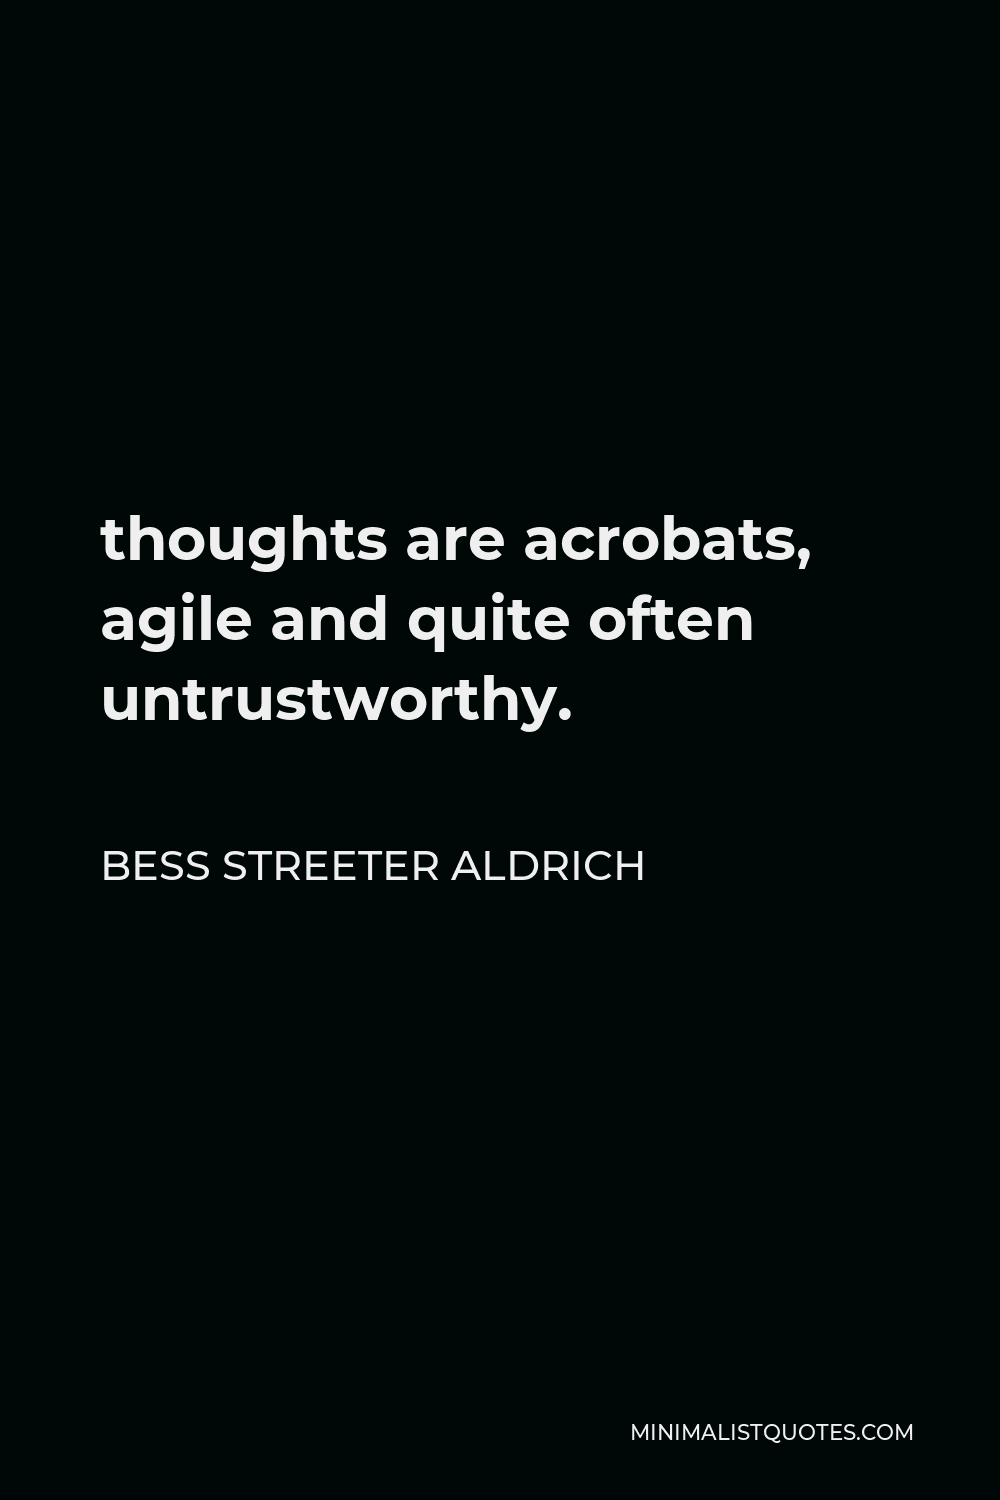 Bess Streeter Aldrich Quote - thoughts are acrobats, agile and quite often untrustworthy.